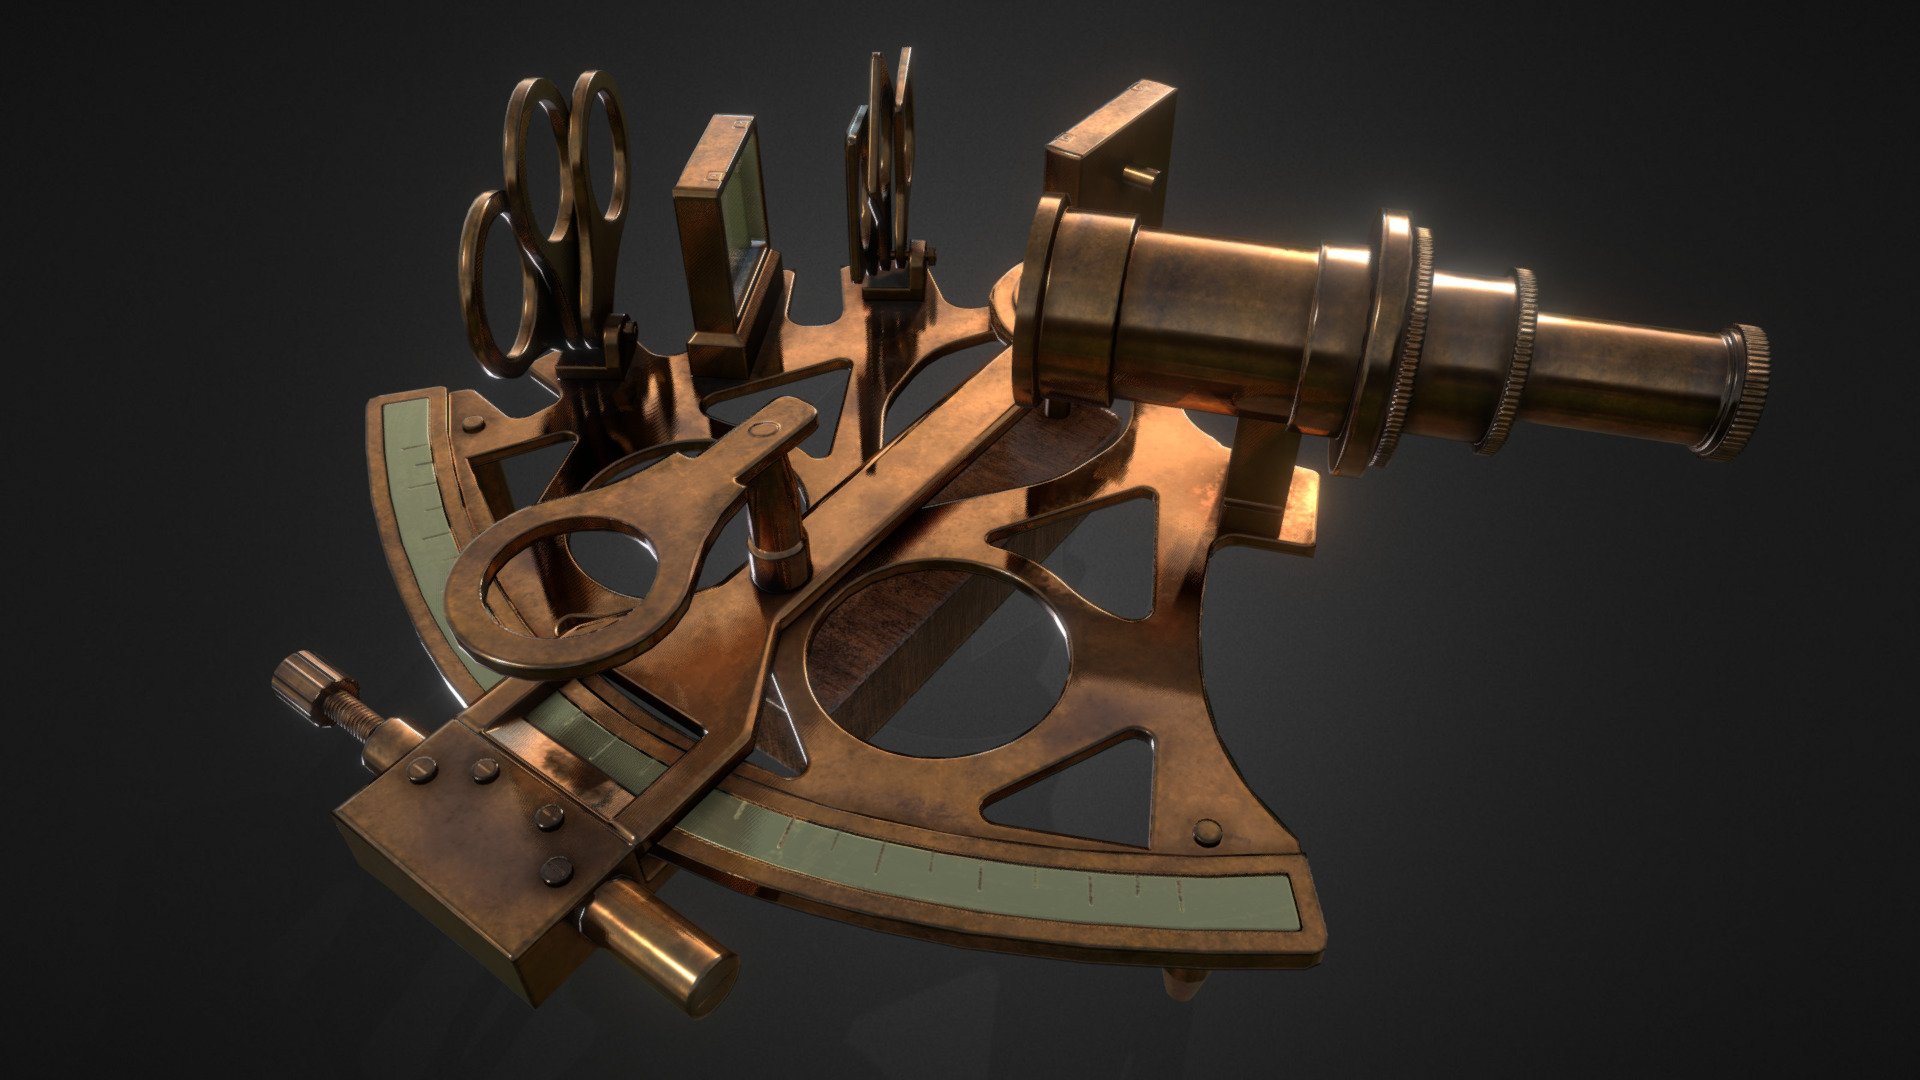 Game ready brass sextant excl. lenses

Sextant:



an instrument with a graduated arc of 60° and a sighting mechanism, used for measuring the angular distances between objects and especially for taking altitudes in navigation and surveying.


Unreal Engine 4 render:


Credits for assets used in the screenshot:

Wooden Table and textures: shedmon 
https://sketchfab.com/shedmon

Map model and textures: Johana-PS 
https://sketchfab.com/Johana-PS - Sextant - 3D model by niels_couvreur 3d model